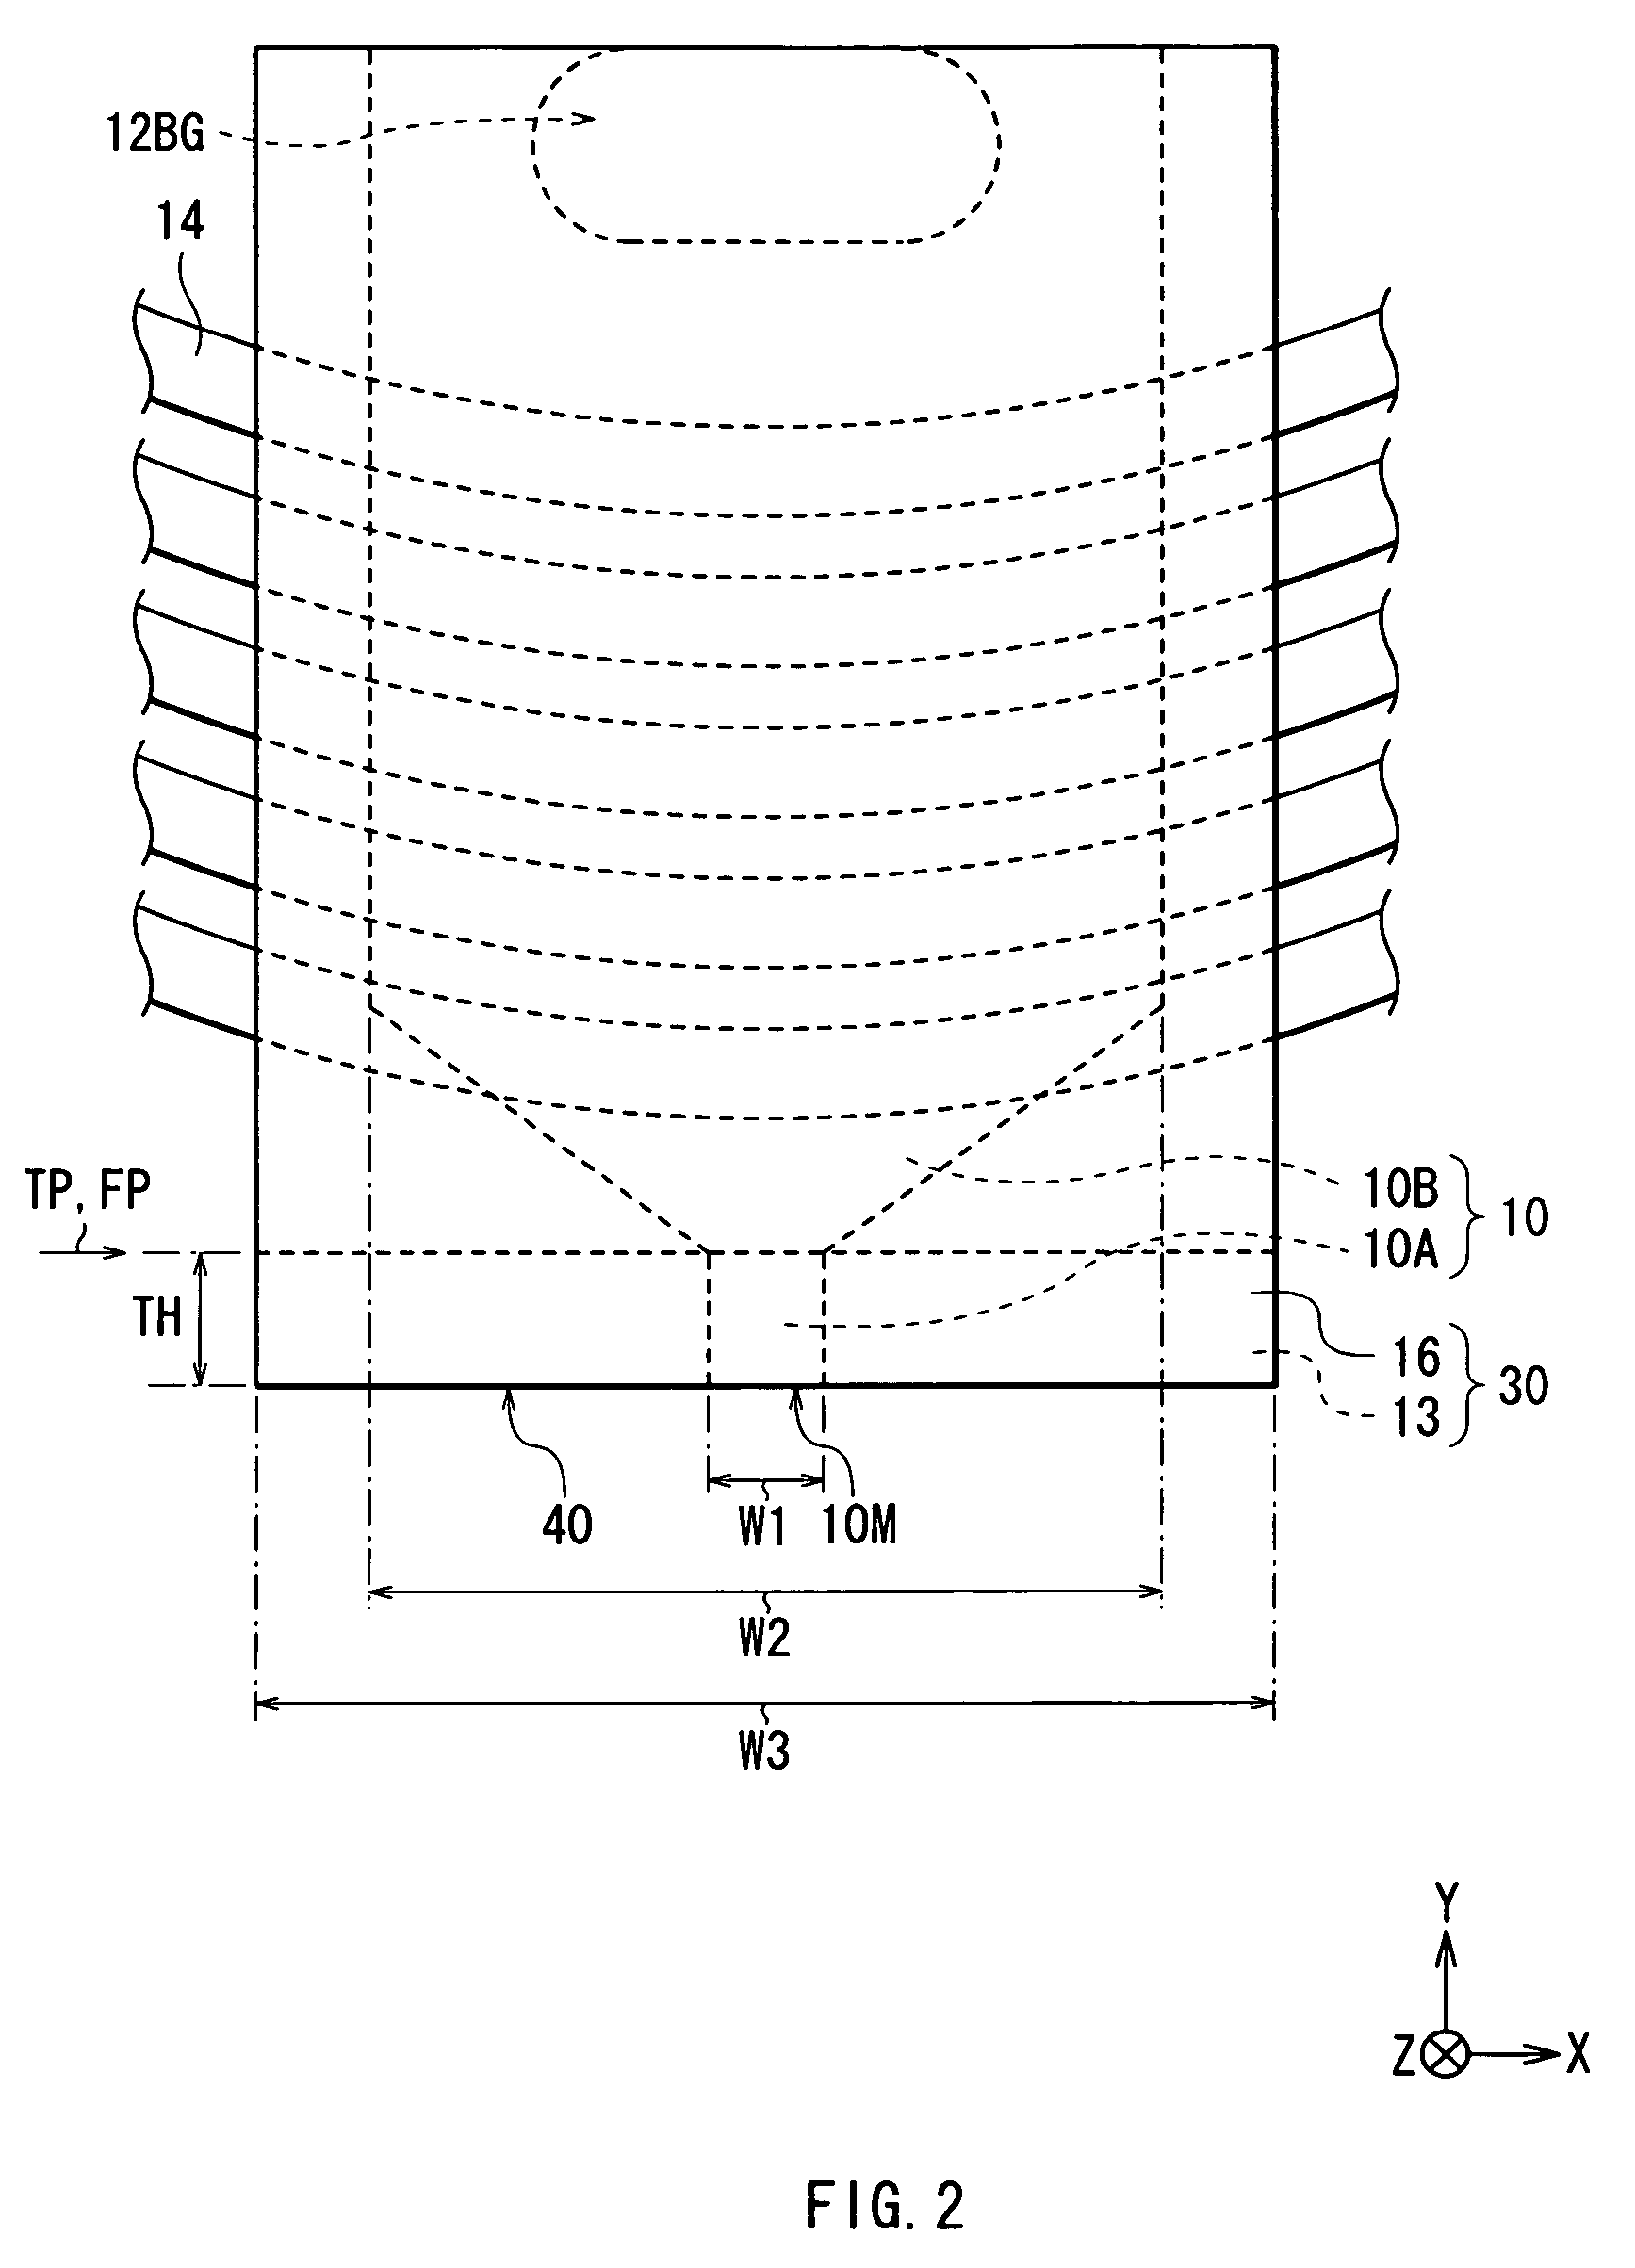 Perpendicular magnetic recording head utilizing tensile stress to optimize magnetic pole layer domain structure